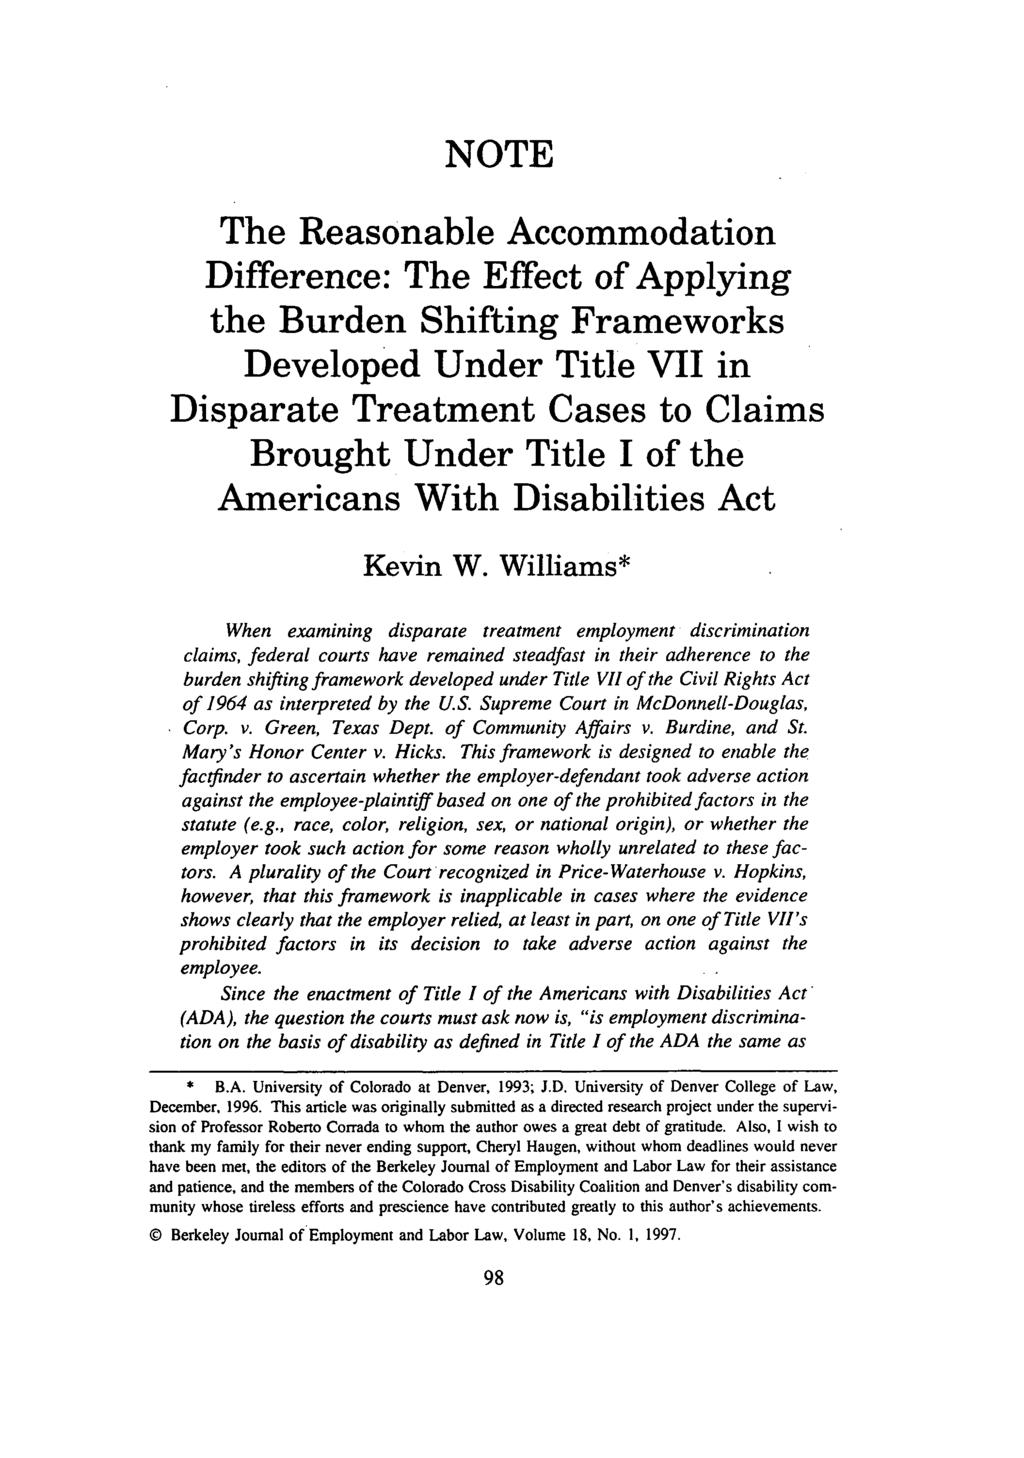 NOTE The Reasonable Accommodation Difference: The Effect of Applying the Burden Shifting Frameworks Developed Under Title VII in Disparate Treatment Cases to Claims Brought Under Title I of the